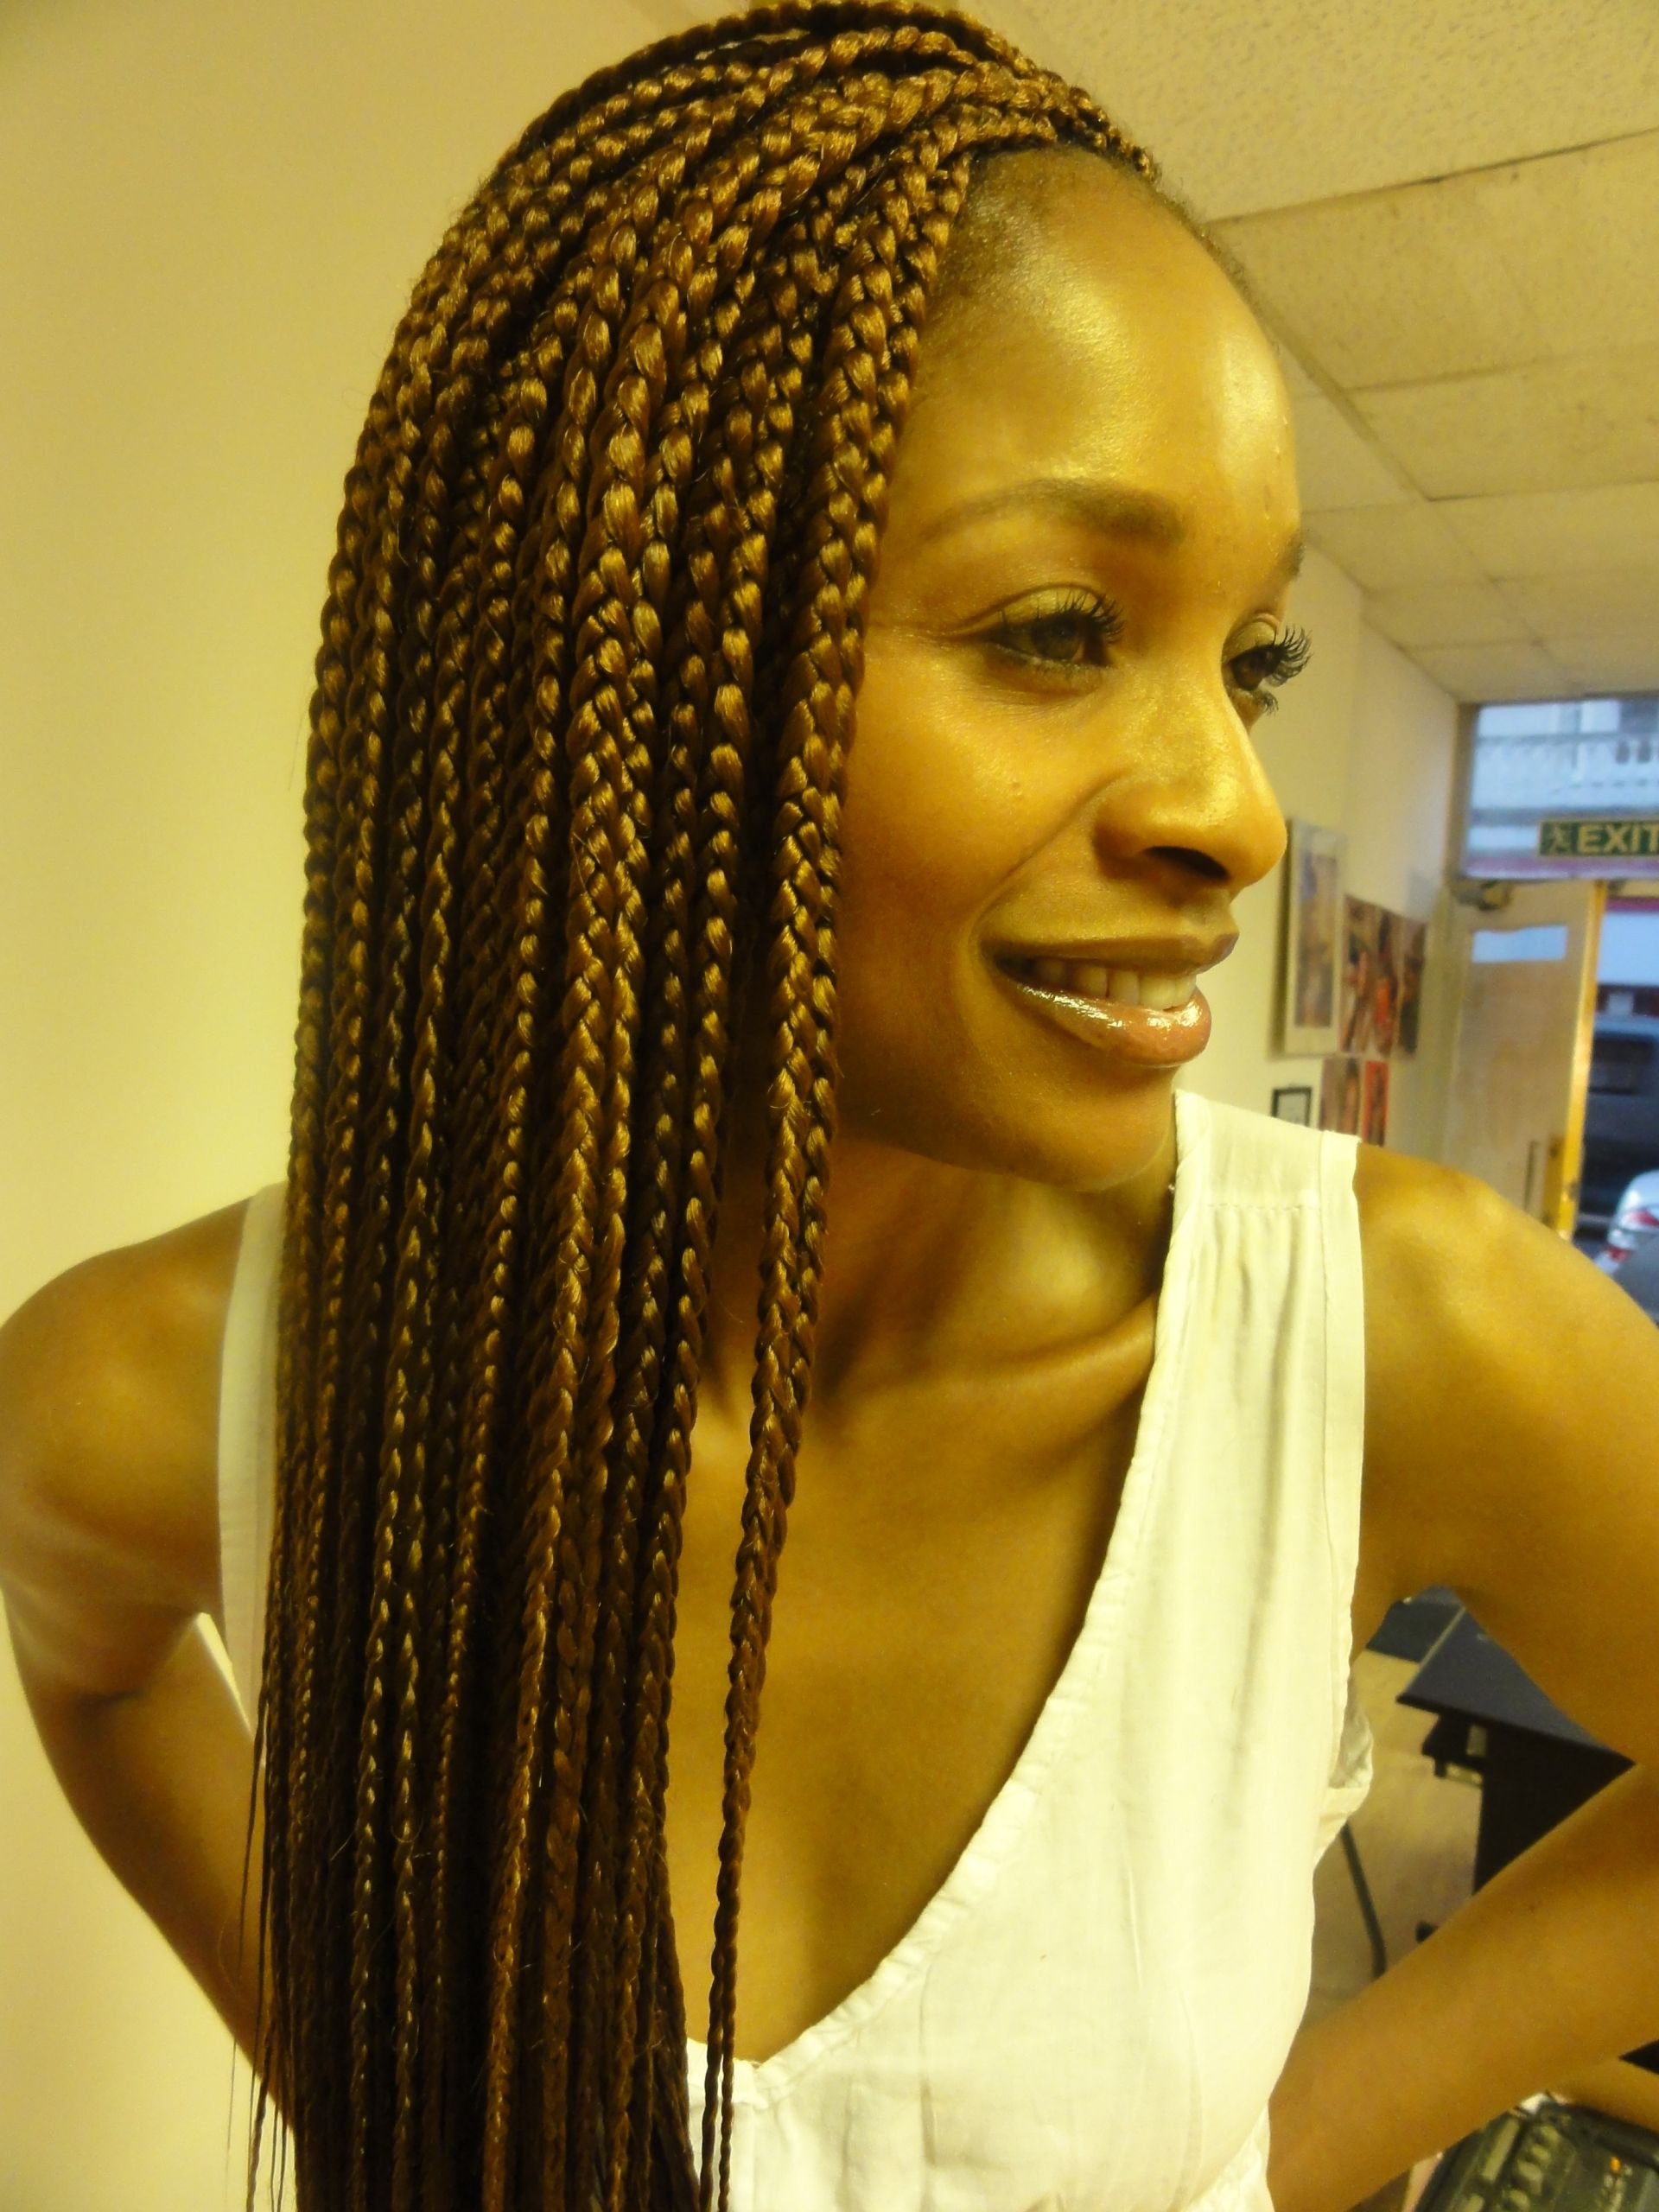 Black Braid Hairstyles Pictures
 Individual Braids Hairstyles For Black Women